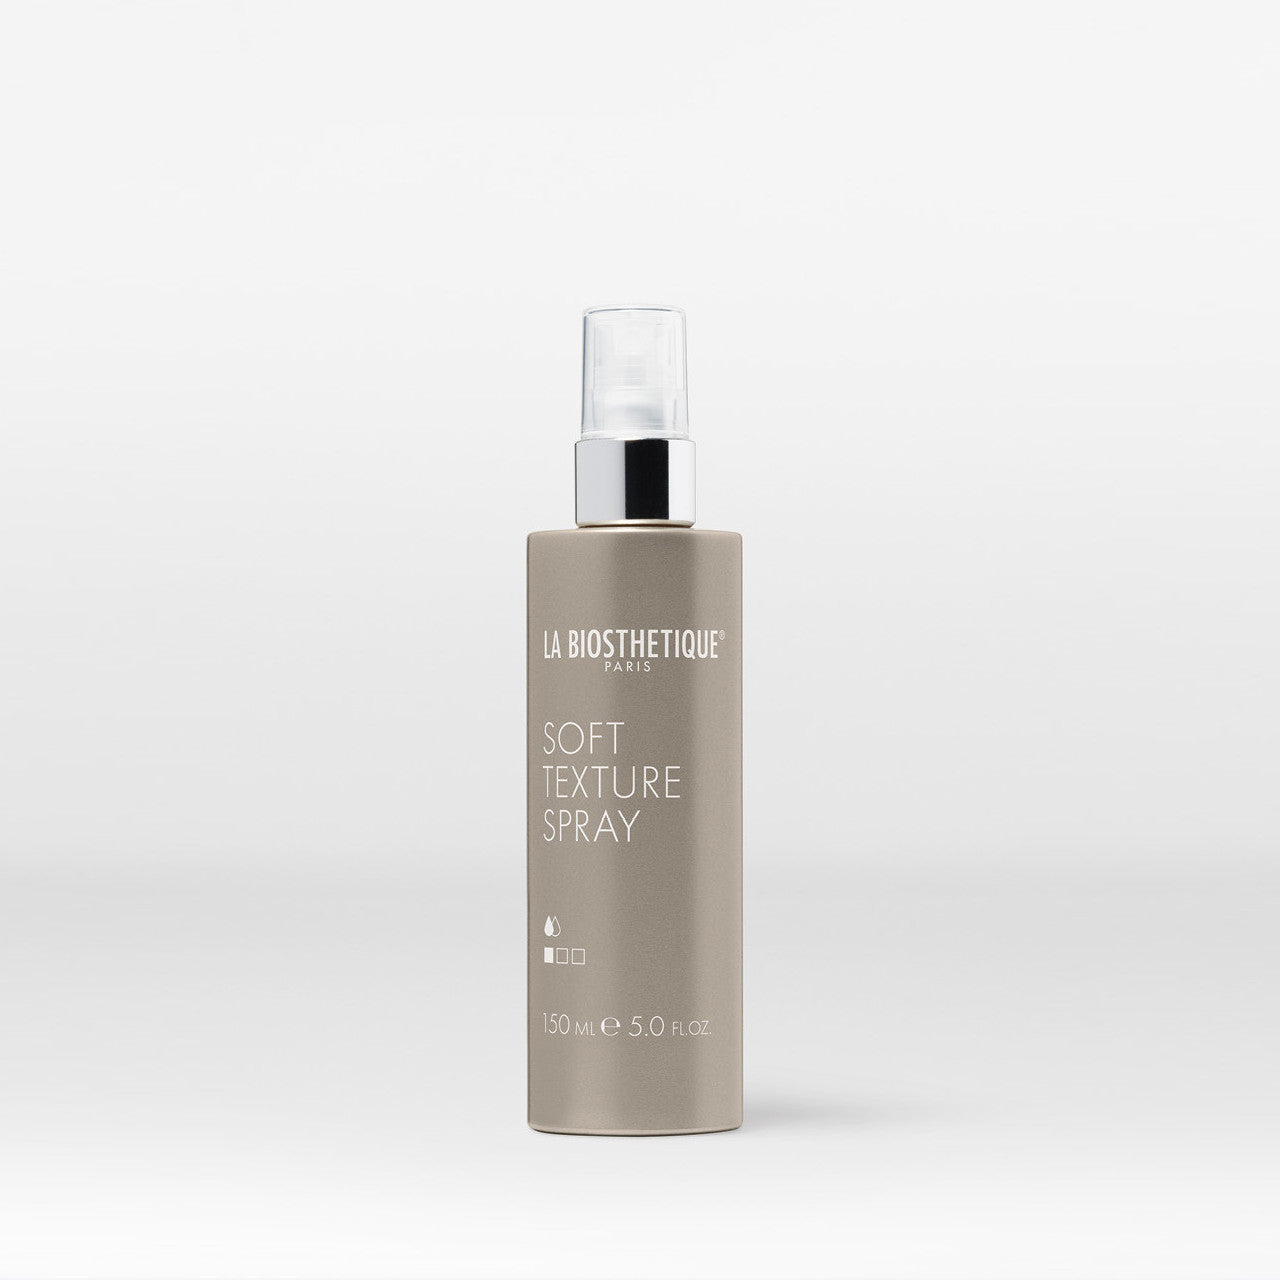 La Biosthetique's Soft Texture Spray 150ml - conditioning styling spray for volume